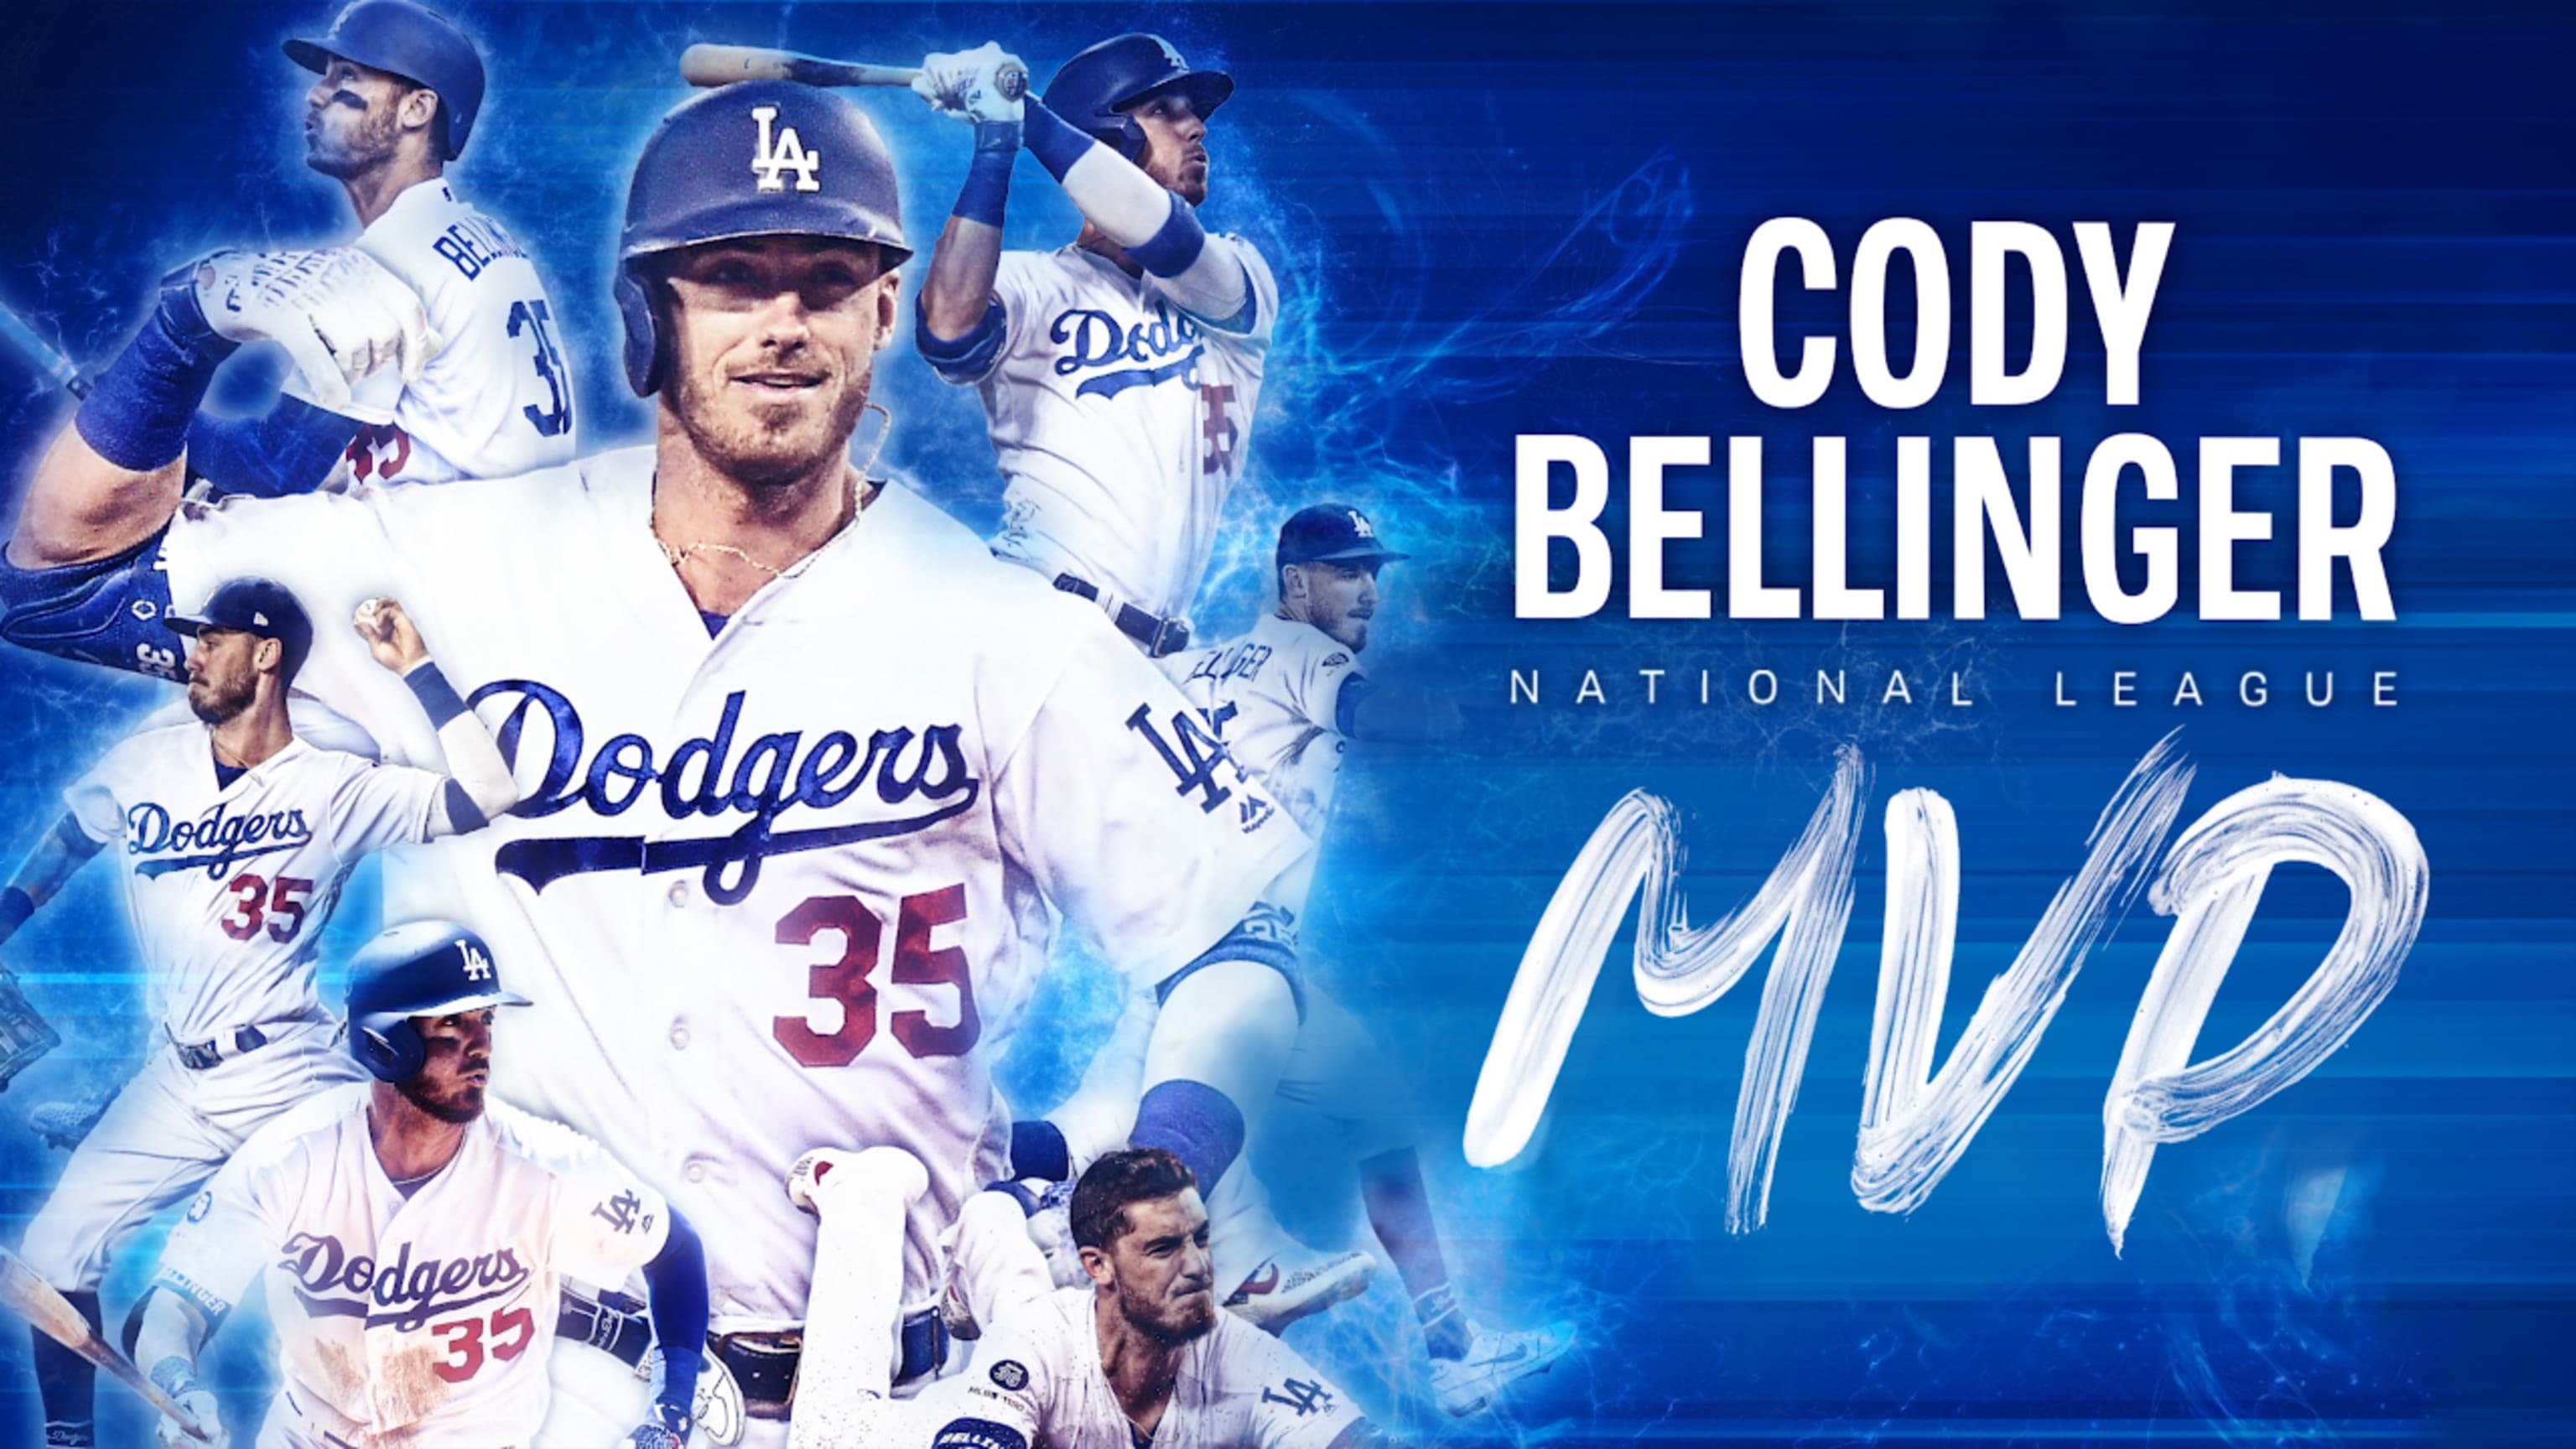 A roundup of Cody Bellinger's awards for 2019